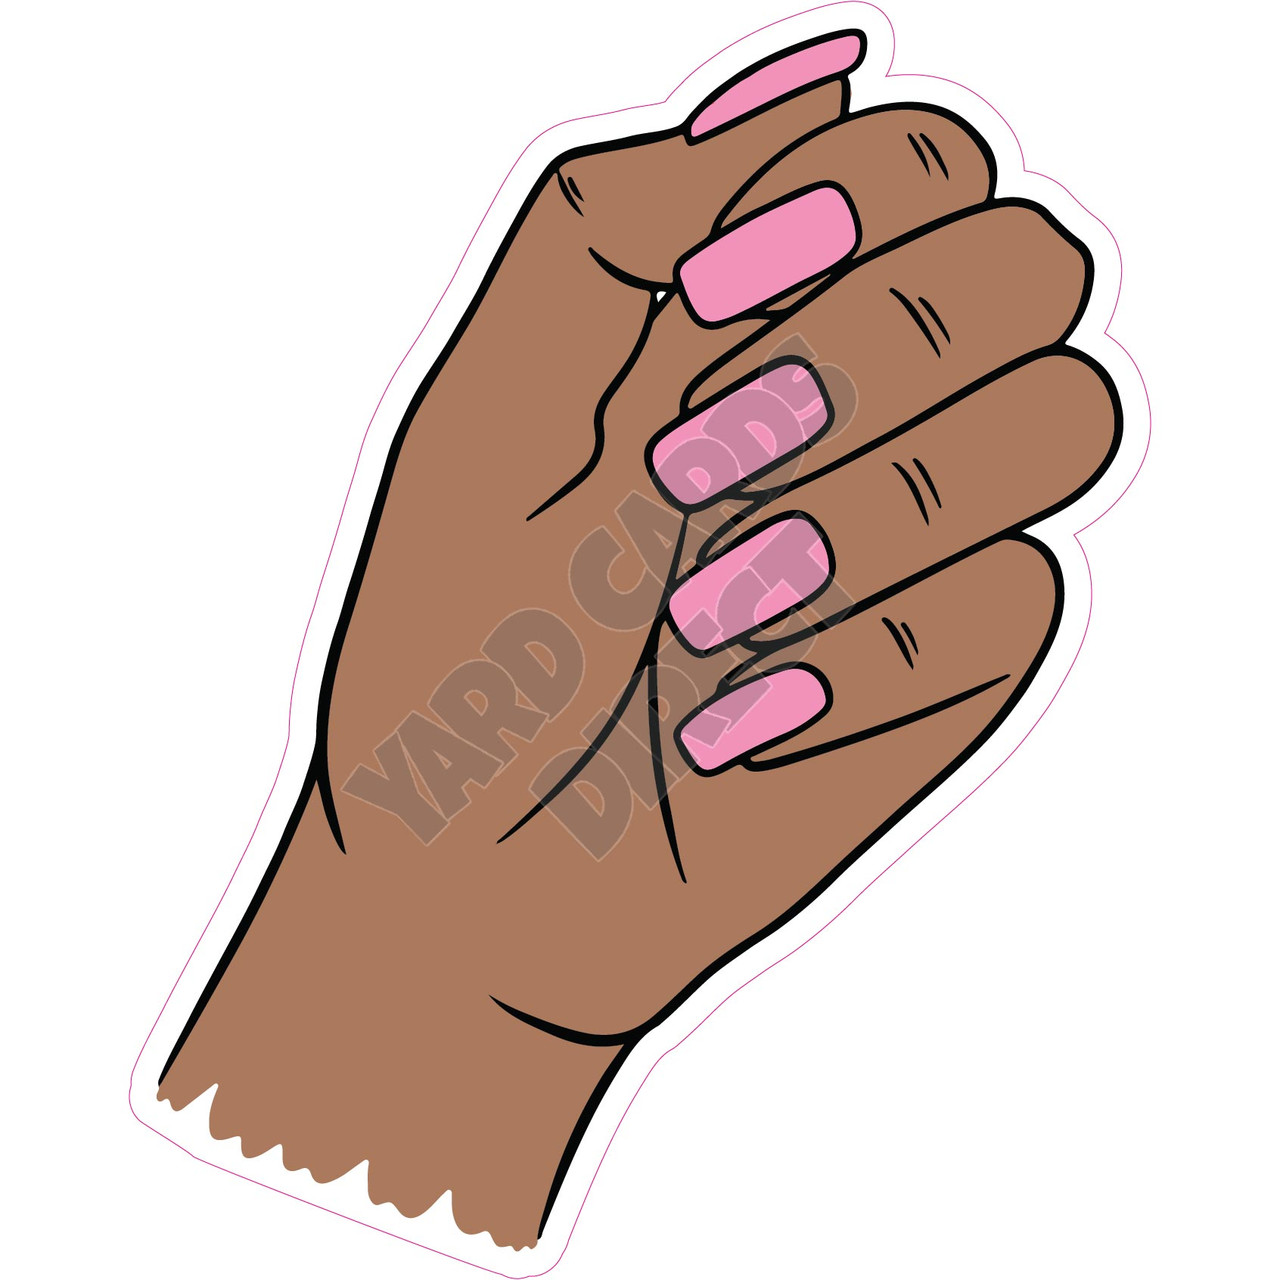 55 Nail Colors That Are Especially Gorgeous on Dark Skin